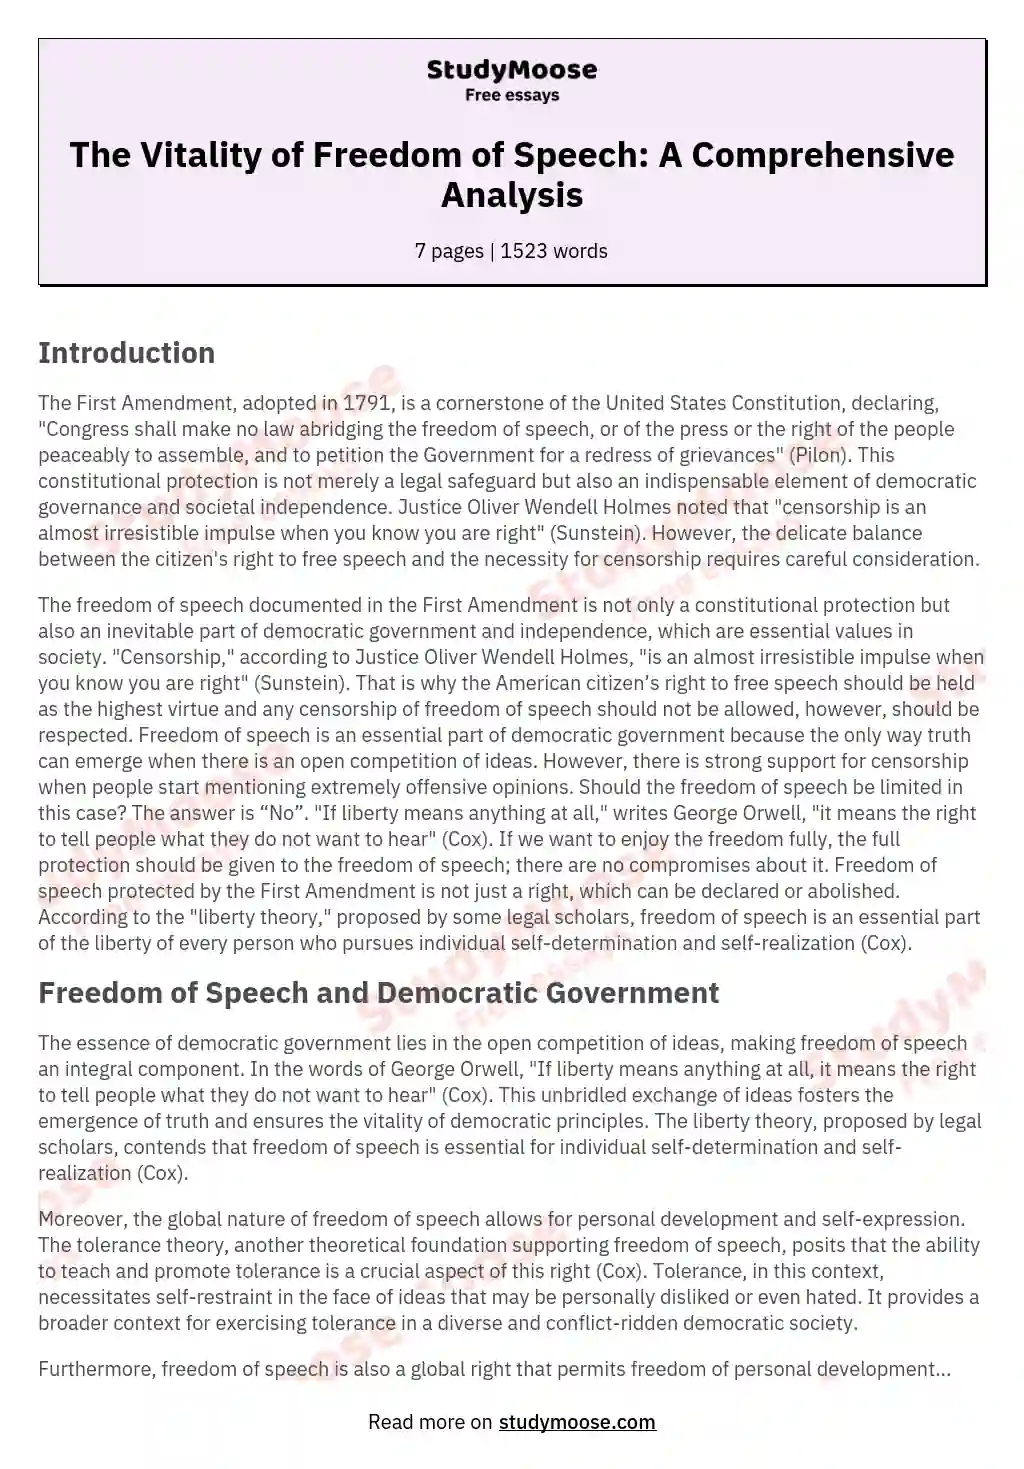 The Vitality of Freedom of Speech: A Comprehensive Analysis essay